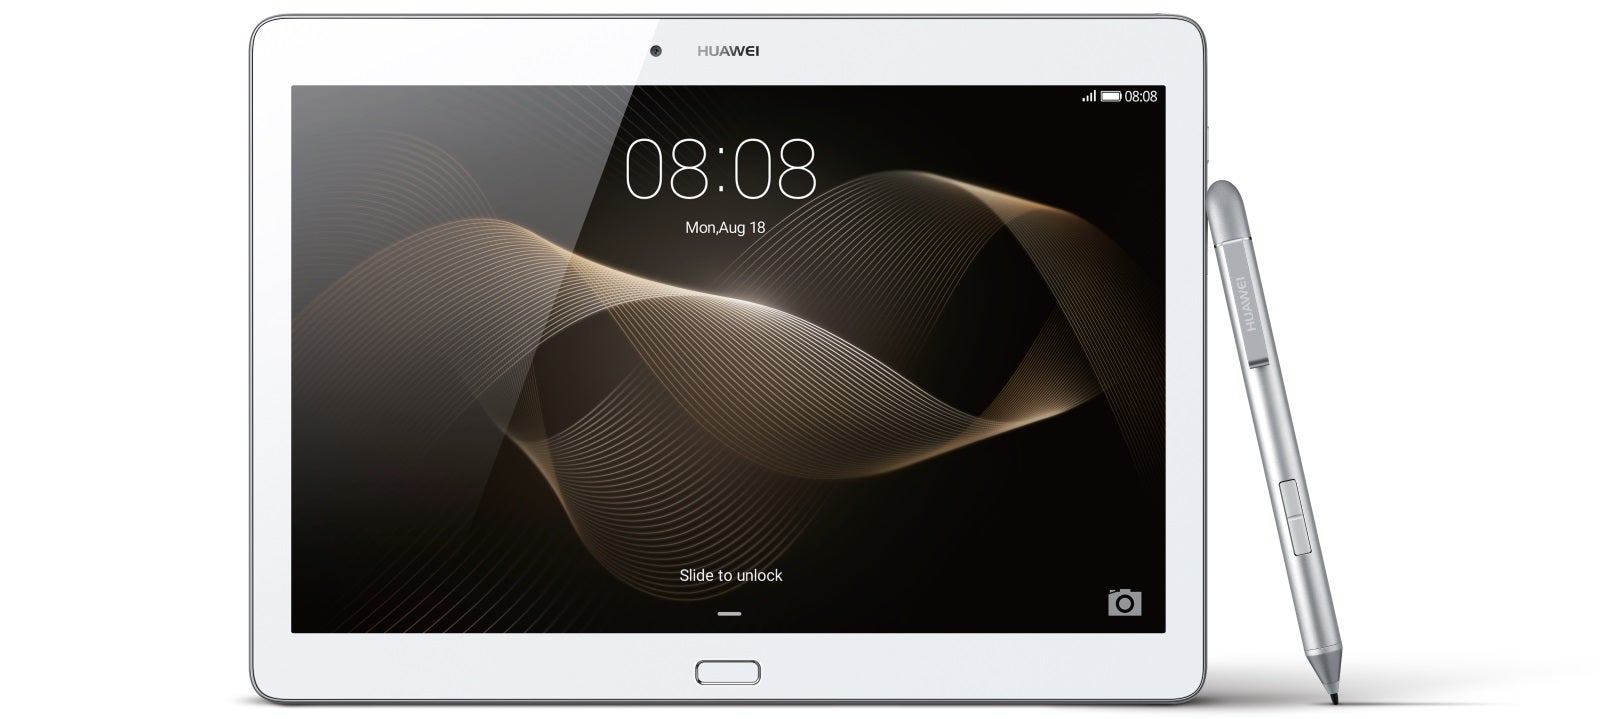 Huawei announces the 10-inch MediaPad M2 tablet with active stylus support